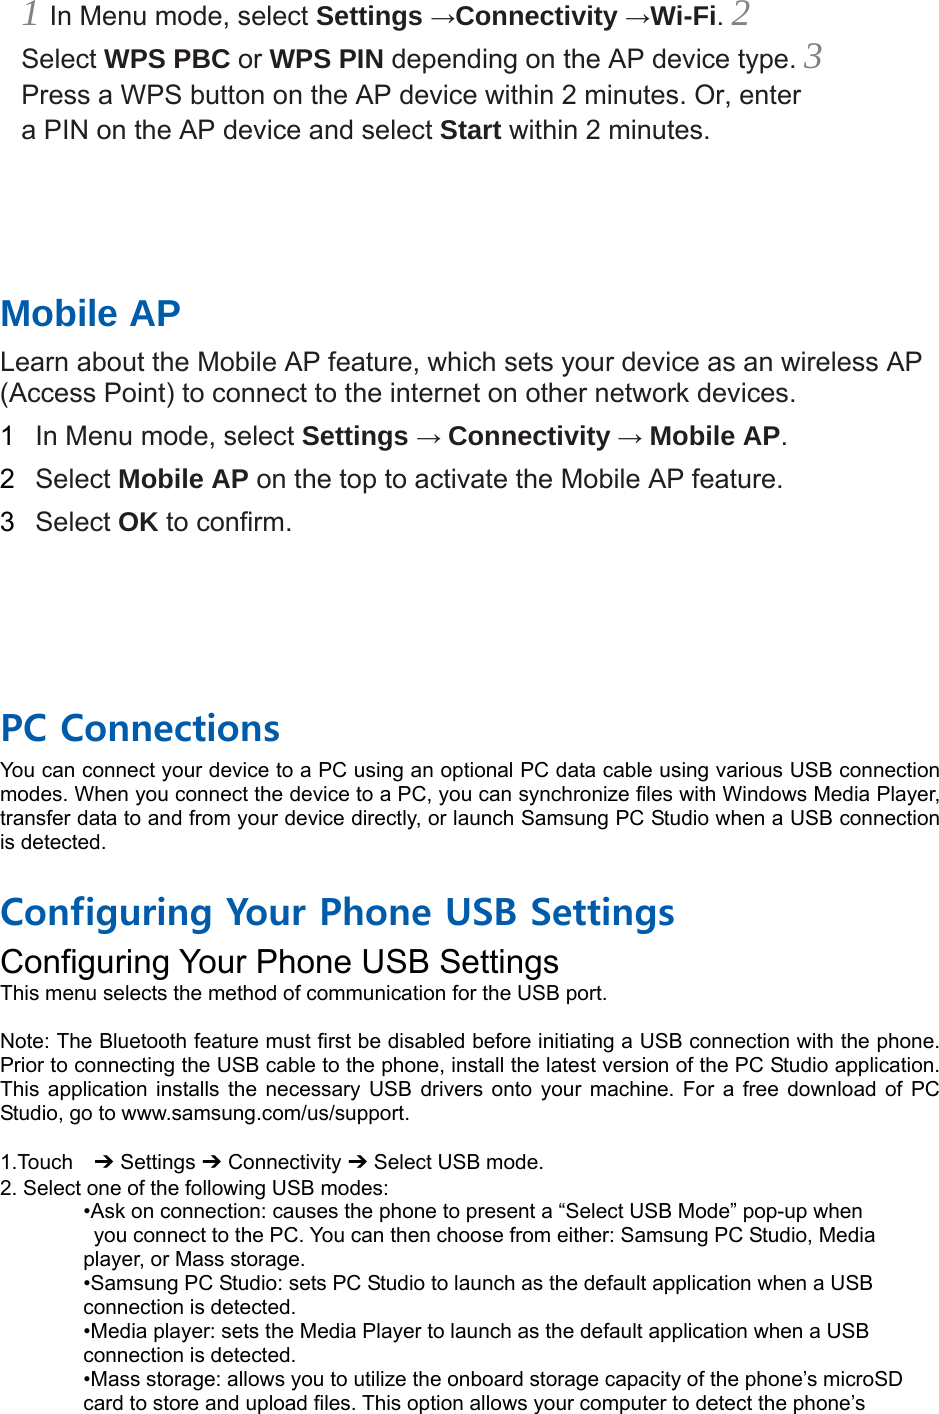 1 In Menu mode, select Settings →Connectivity →Wi-Fi. 2 Select WPS PBC or WPS PIN depending on the AP device type. 3 Press a WPS button on the AP device within 2 minutes. Or, enter a PIN on the AP device and select Start within 2 minutes.       Mobile AP   Learn about the Mobile AP feature, which sets your device as an wireless AP (Access Point) to connect to the internet on other network devices.   1  In Menu mode, select Settings → Connectivity → Mobile AP.  2  Select Mobile AP on the top to activate the Mobile AP feature.   3  Select OK to confirm.       PC Connections You can connect your device to a PC using an optional PC data cable using various USB connection modes. When you connect the device to a PC, you can synchronize files with Windows Media Player, transfer data to and from your device directly, or launch Samsung PC Studio when a USB connection is detected.  Configuring Your Phone USB Settings Configuring Your Phone USB Settings This menu selects the method of communication for the USB port.  Note: The Bluetooth feature must first be disabled before initiating a USB connection with the phone. Prior to connecting the USB cable to the phone, install the latest version of the PC Studio application. This application installs the necessary USB drivers onto your machine. For a free download of PC Studio, go to www.samsung.com/us/support.  1.Touch  ➔ Settings ➔ Connectivity ➔ Select USB mode. 2. Select one of the following USB modes: •Ask on connection: causes the phone to present a “Select USB Mode” pop-up when   you connect to the PC. You can then choose from either: Samsung PC Studio, Media   player, or Mass storage. •Samsung PC Studio: sets PC Studio to launch as the default application when a USB   connection is detected. •Media player: sets the Media Player to launch as the default application when a USB   connection is detected. •Mass storage: allows you to utilize the onboard storage capacity of the phone’s microSD   card to store and upload files. This option allows your computer to detect the phone’s   